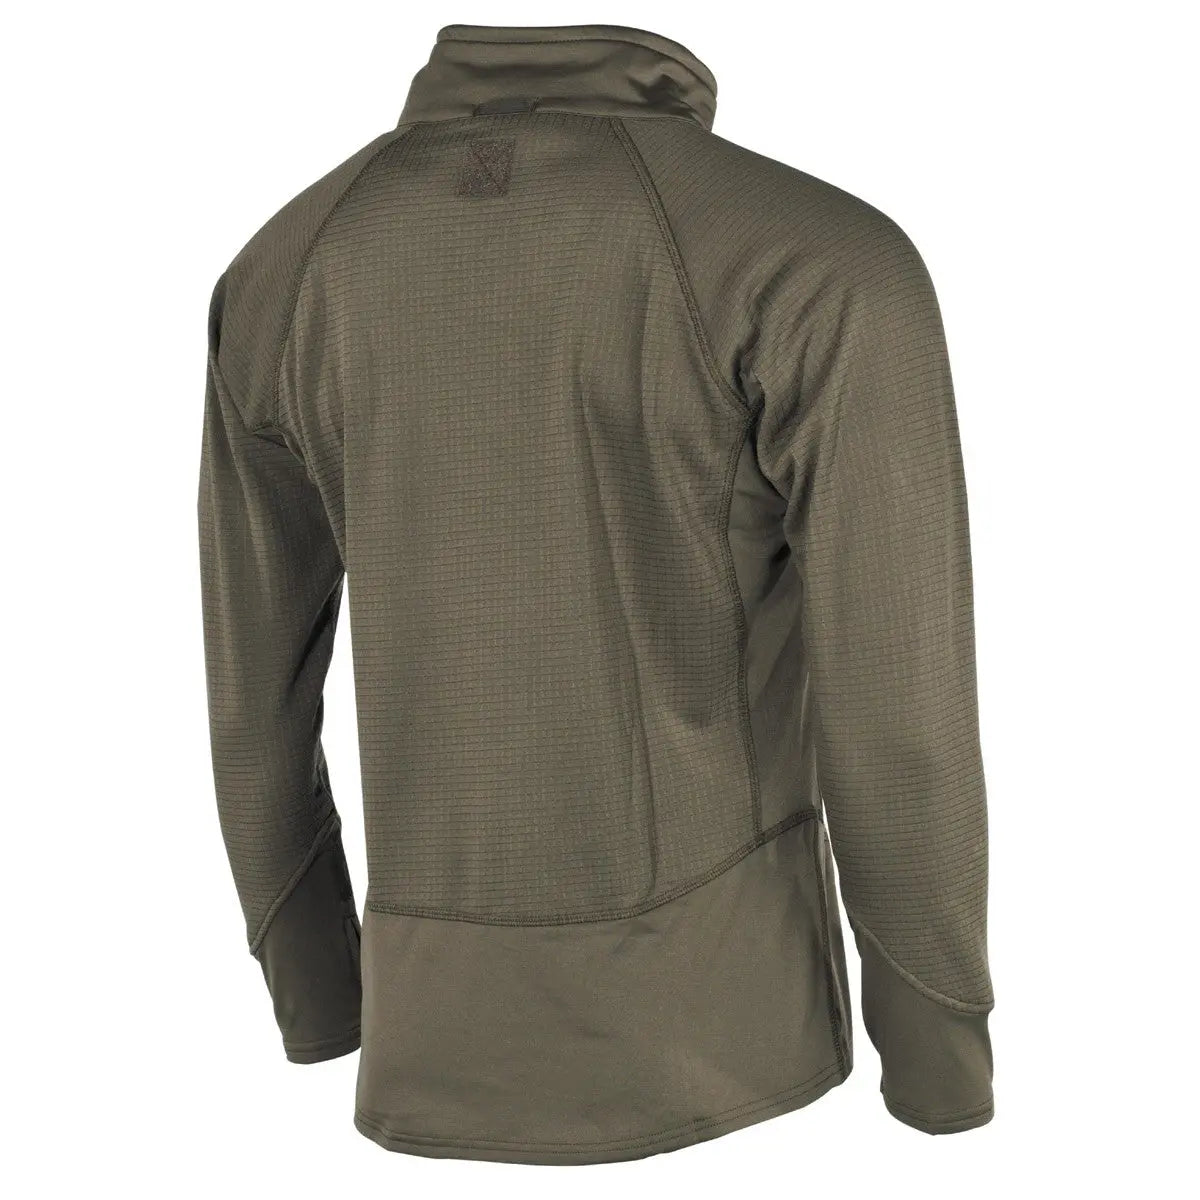 US Jacket Lining, "Tactical", OD green NSO Gear